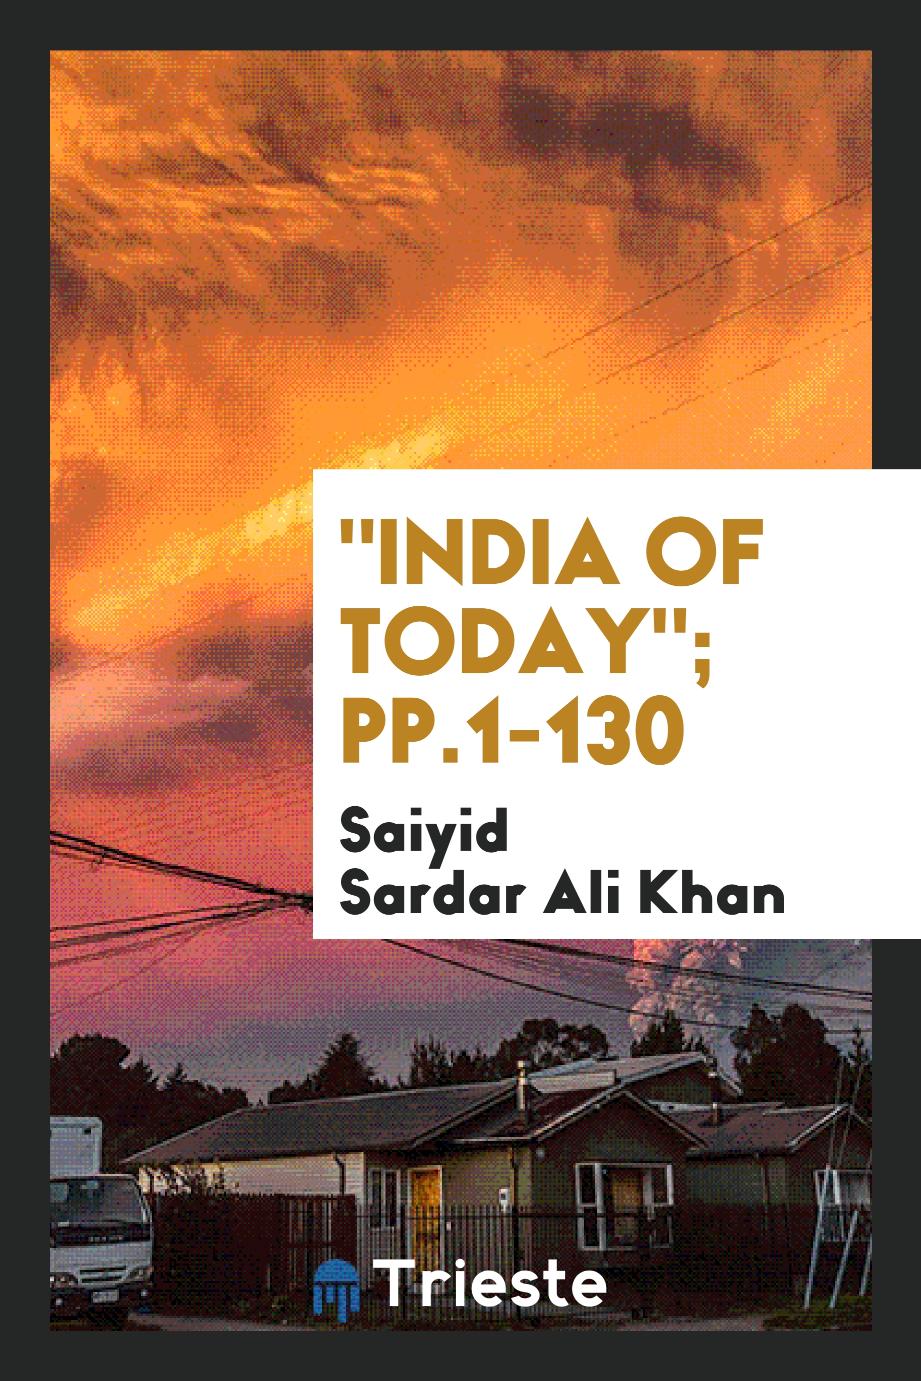 "India of Today"; pp.1-130